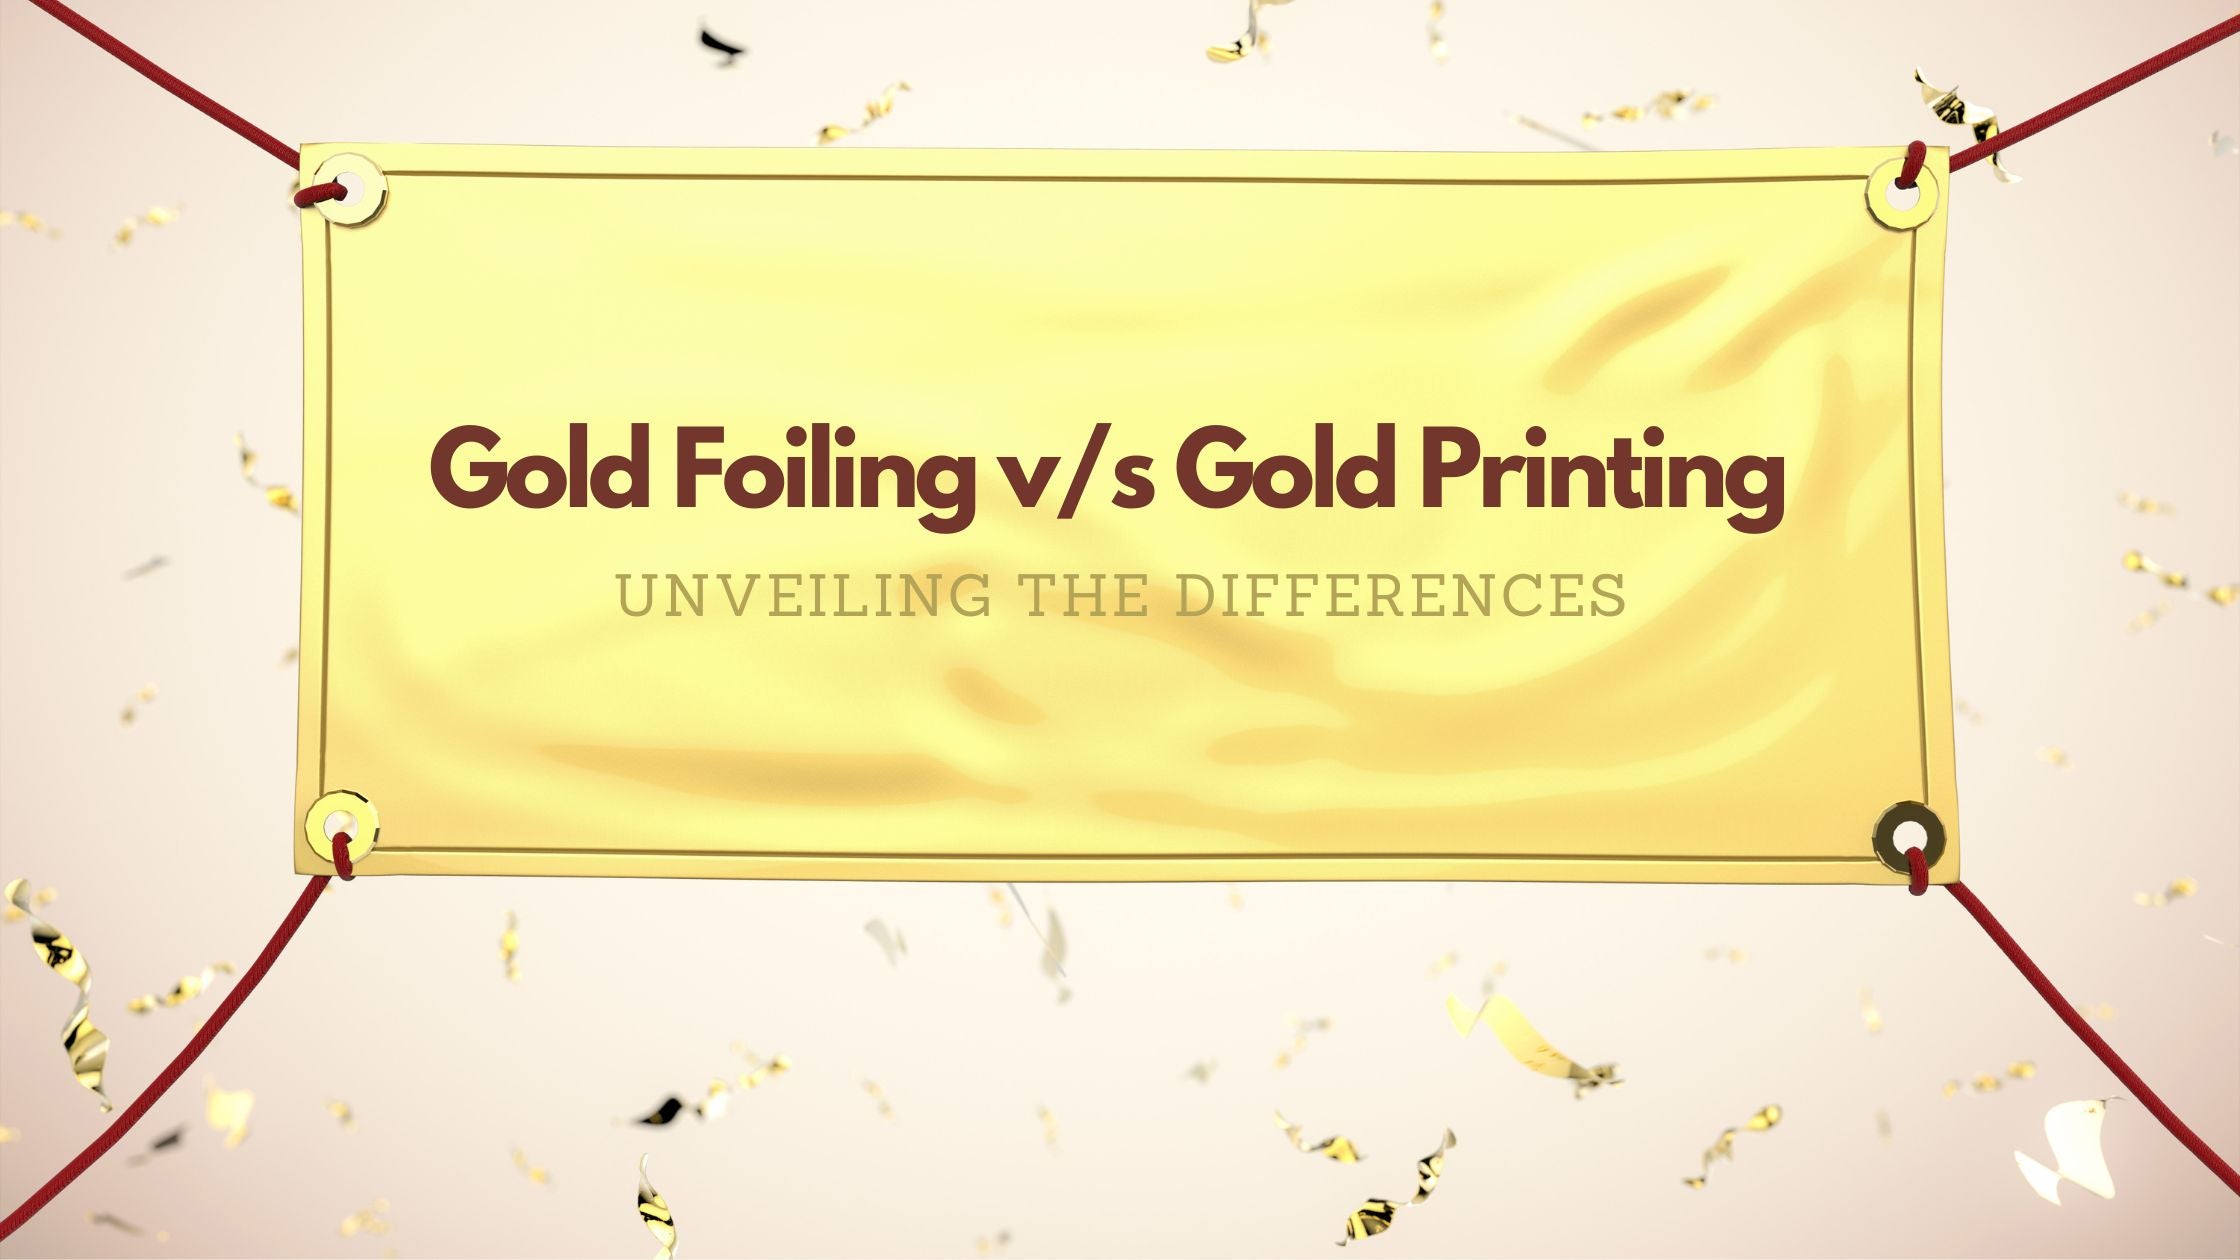 Gold Foiling vs. Gold Printing: Unveiling the Differences